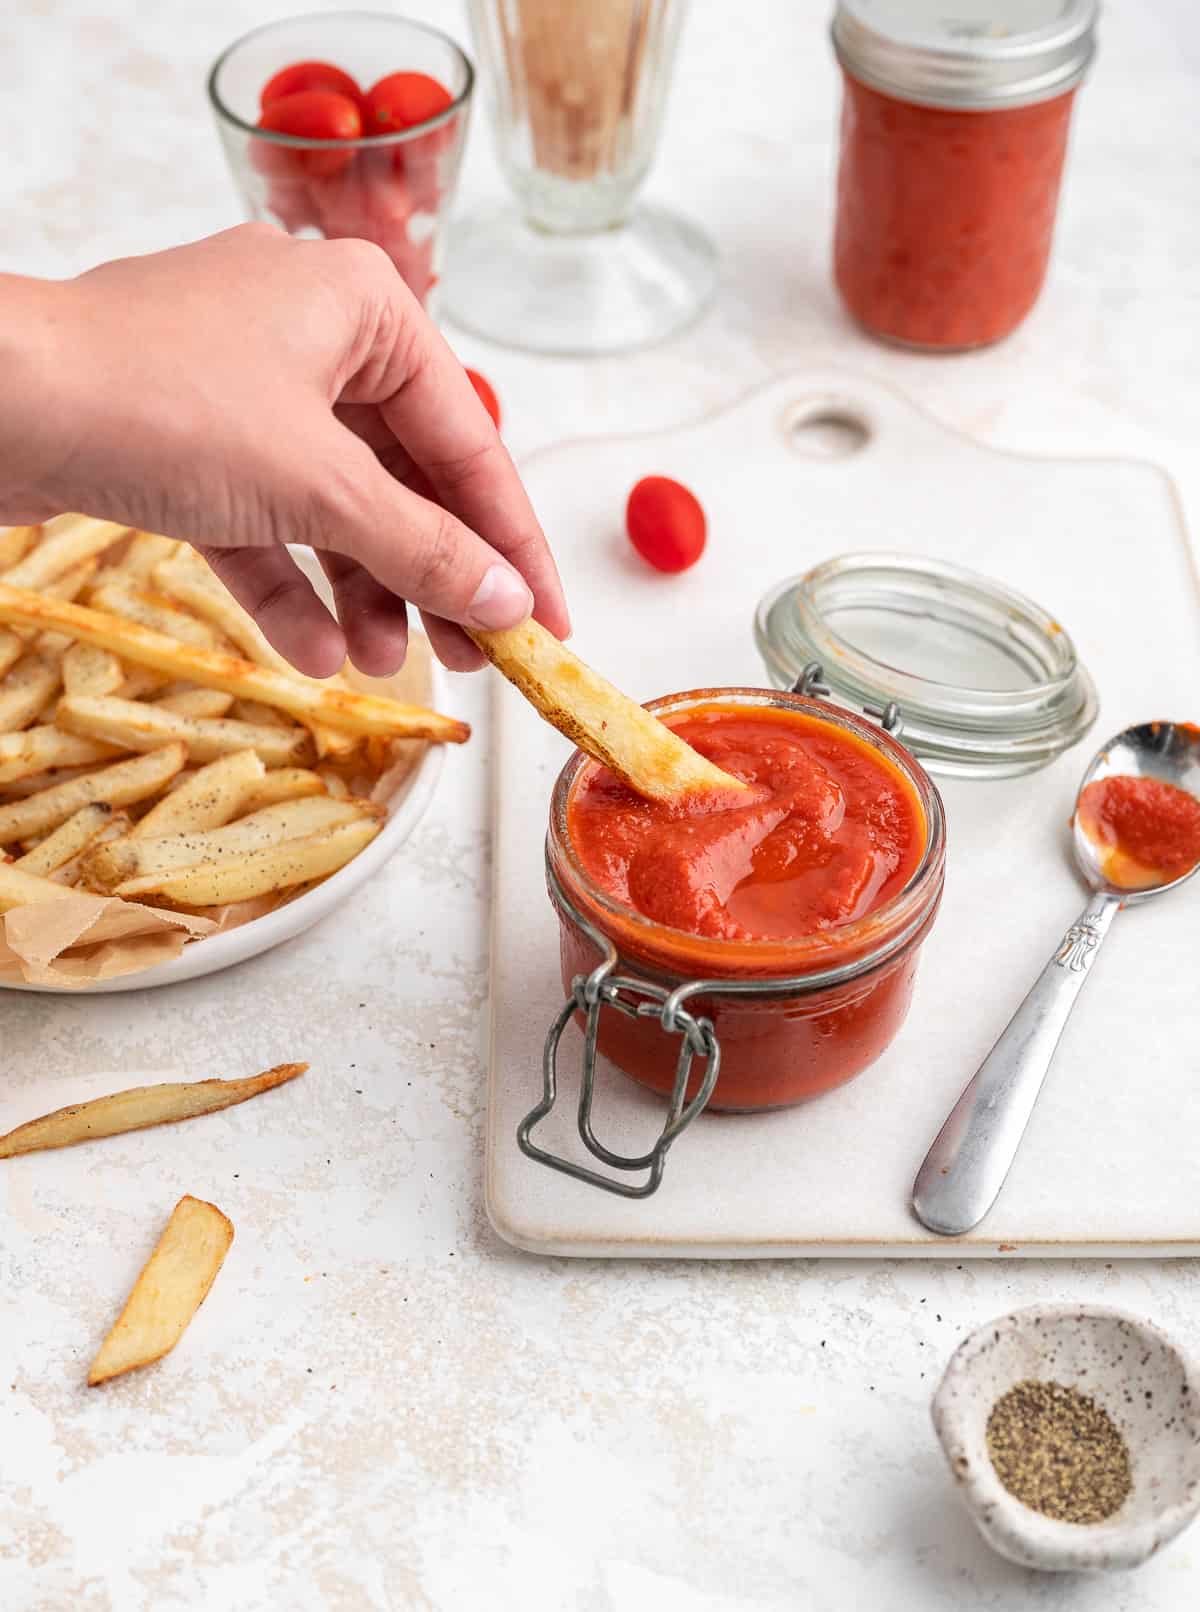 french fry being dipped into homemade ketchup